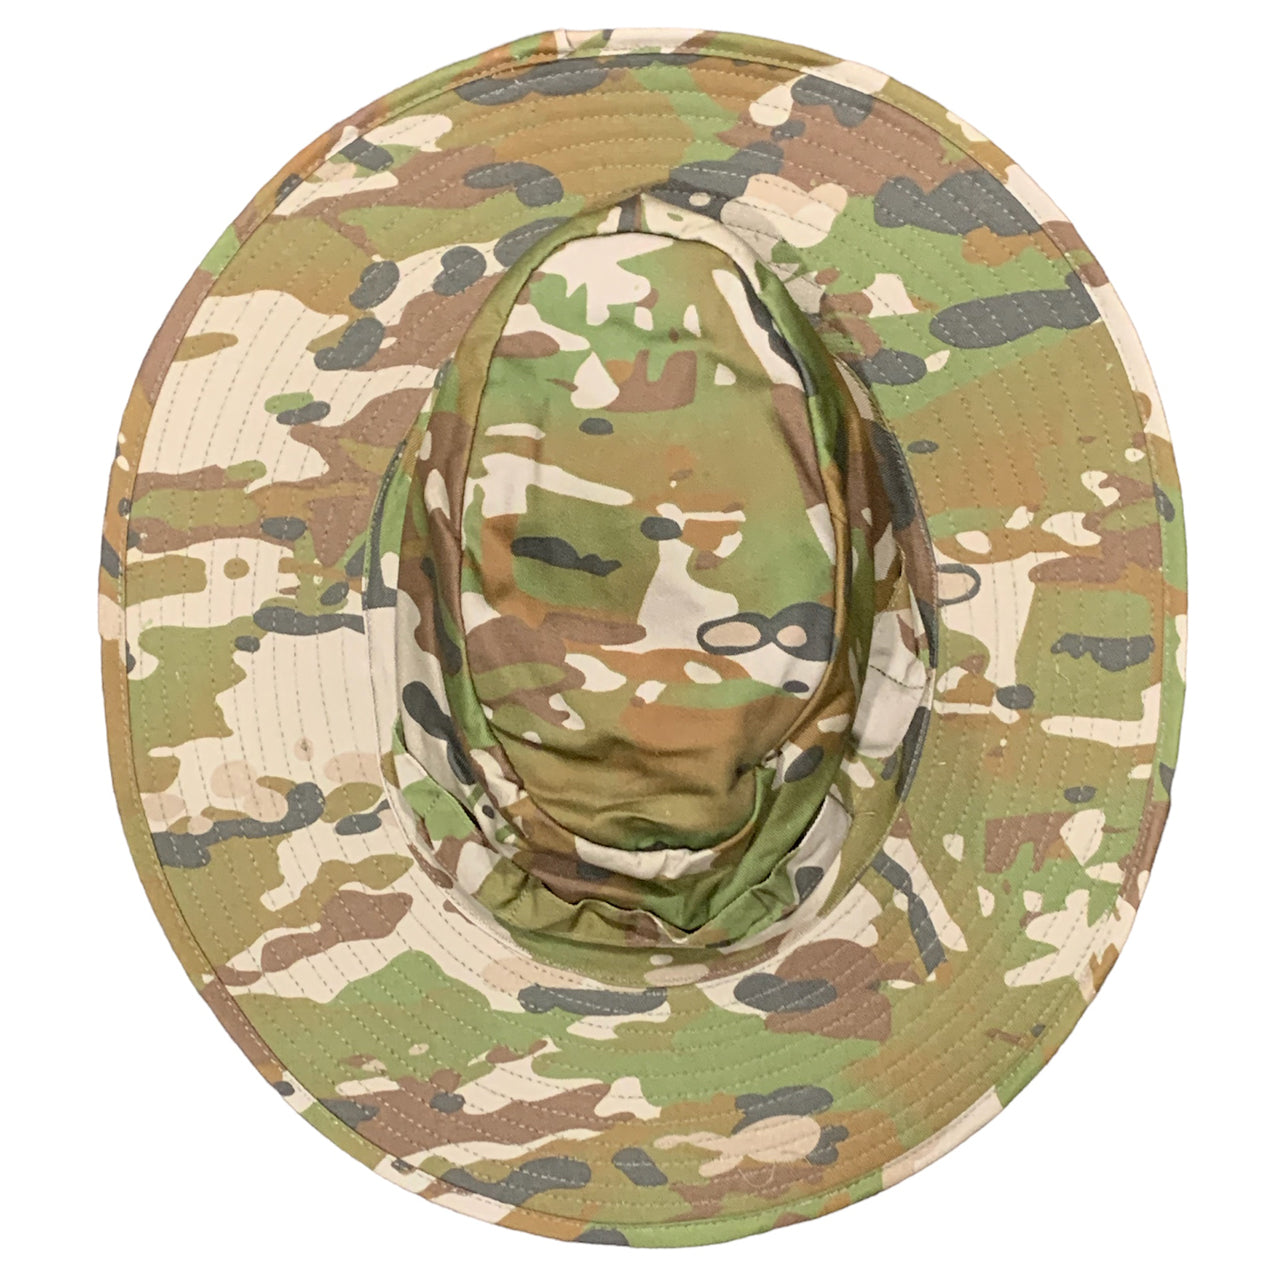 Experience the ultimate in style and functionality with the Army Australian Multicam Wide Brimmed Boonie Hat AMCU. Featuring a classic slouch hat design with a trendy 83 mm wide brim, this hat also includes a convenient cord chinstrap and cord lock www.defenceqstore.com.au top view of material